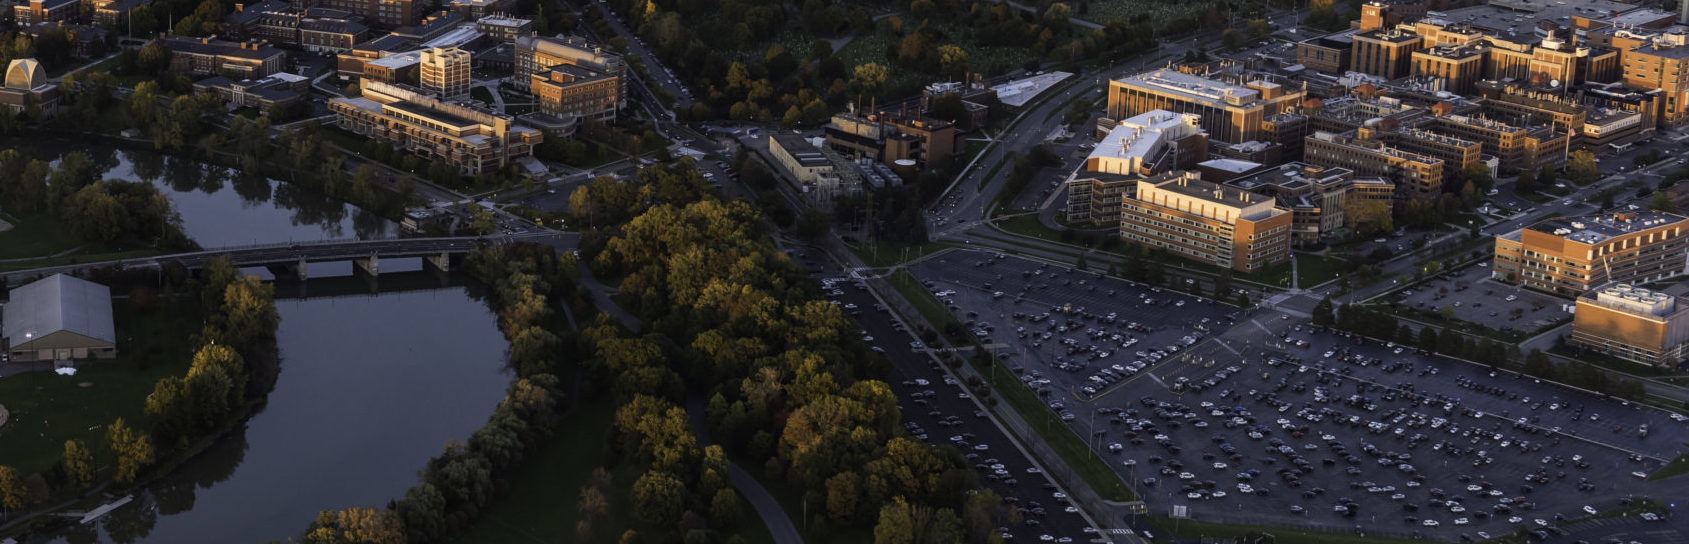 Medical Center and River Campus overhead view